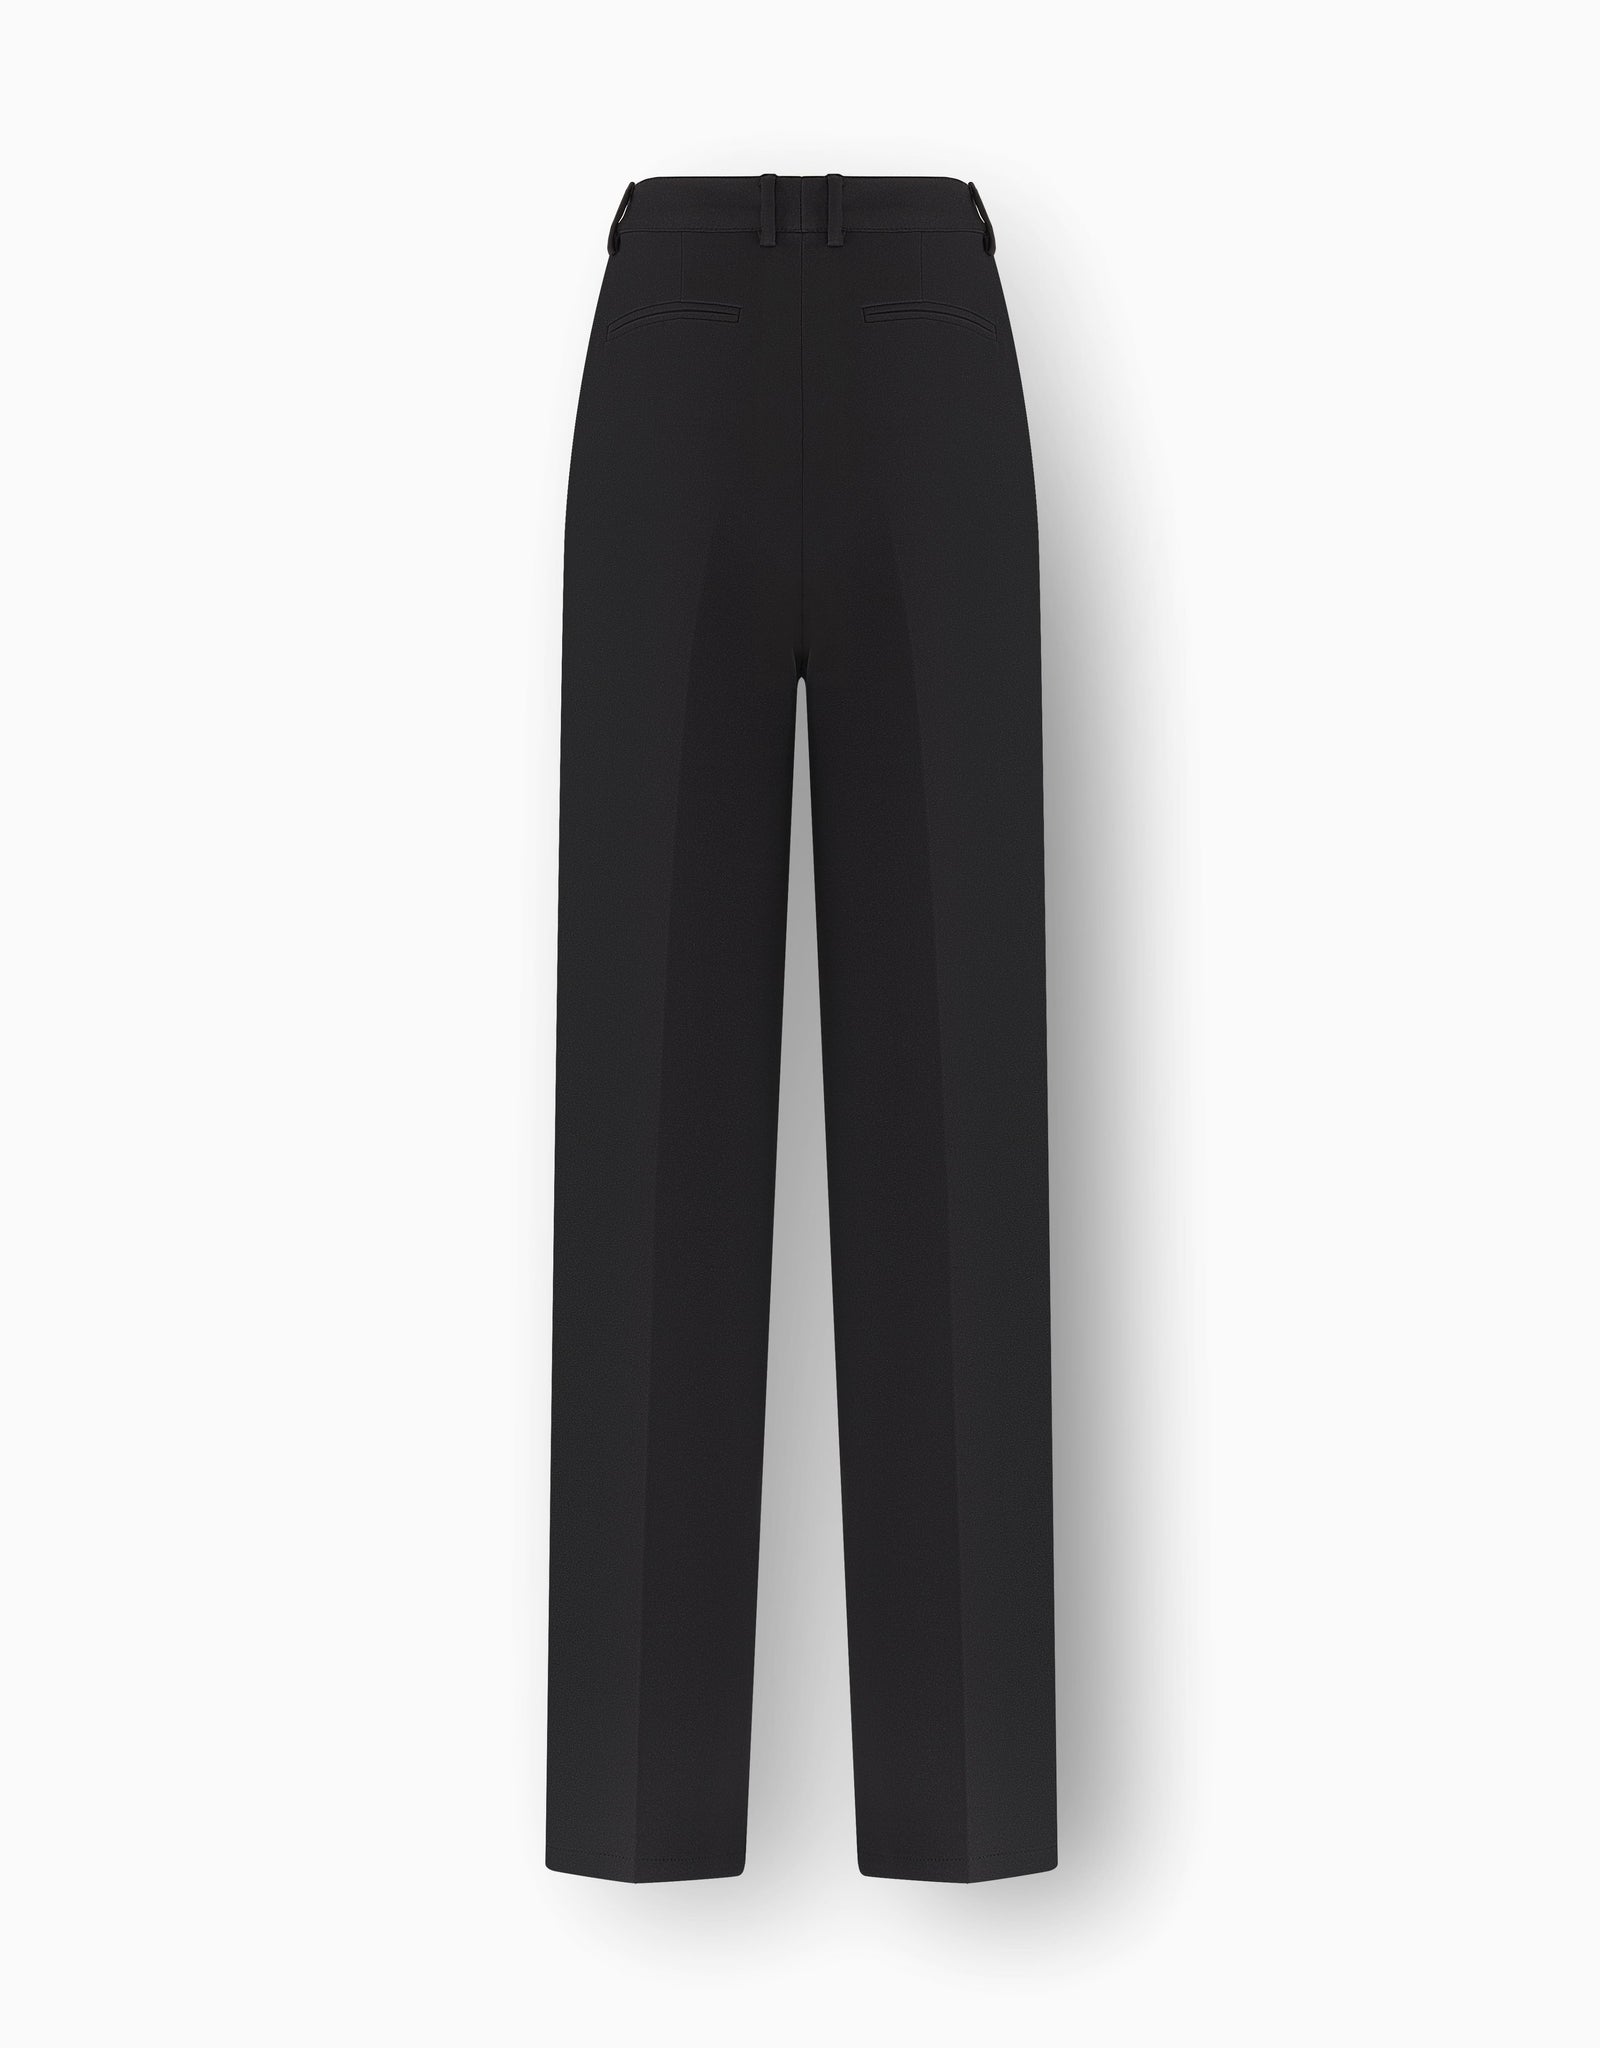 O'CONNOR WIDE-LEG TAILORED PANTS